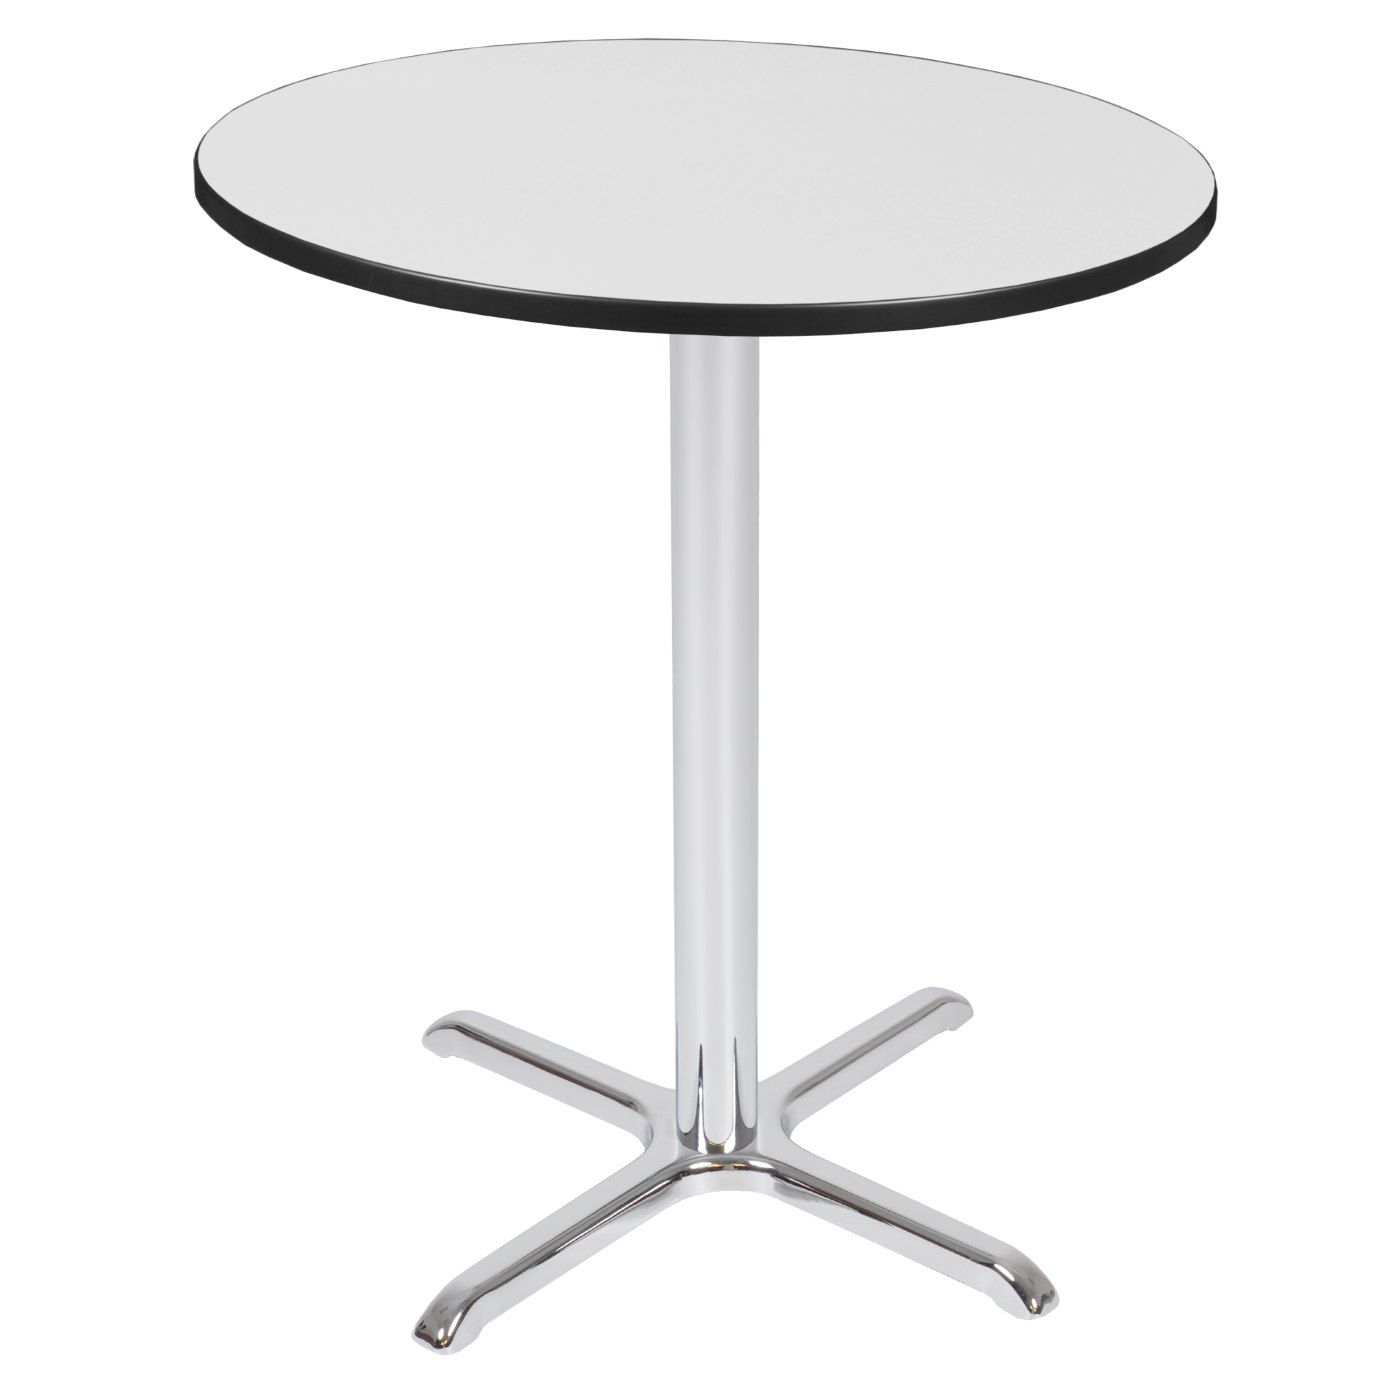 Tcb36rndwhcm | Regency Cain Cafe High 36" Round X Base Table  White Inside Regency Cain Steel Coffee Tables (View 3 of 15)